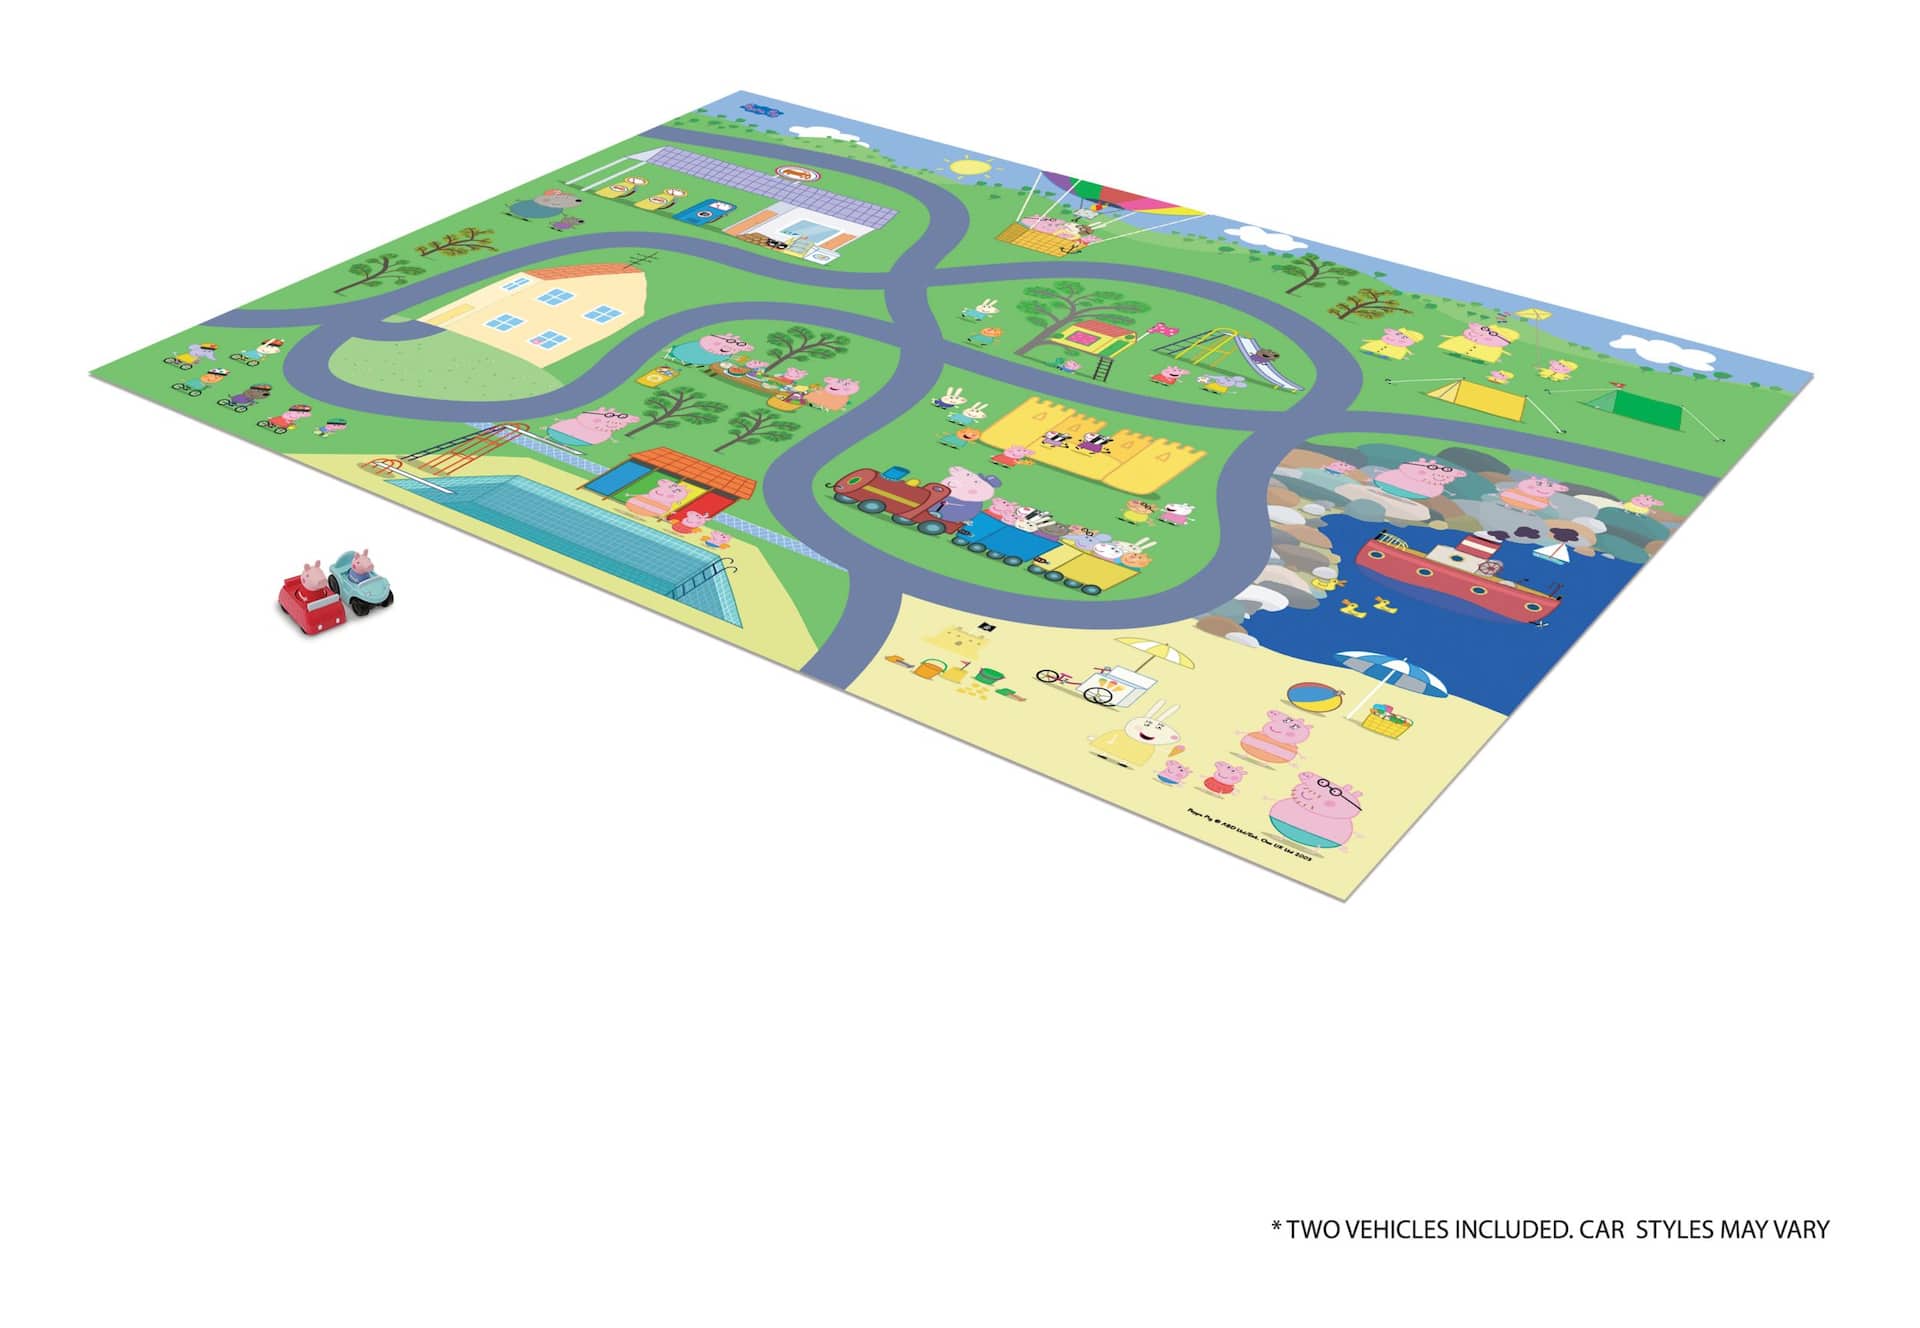  Fisher-Price Extra Big Adventures Play Mat, 60-inch